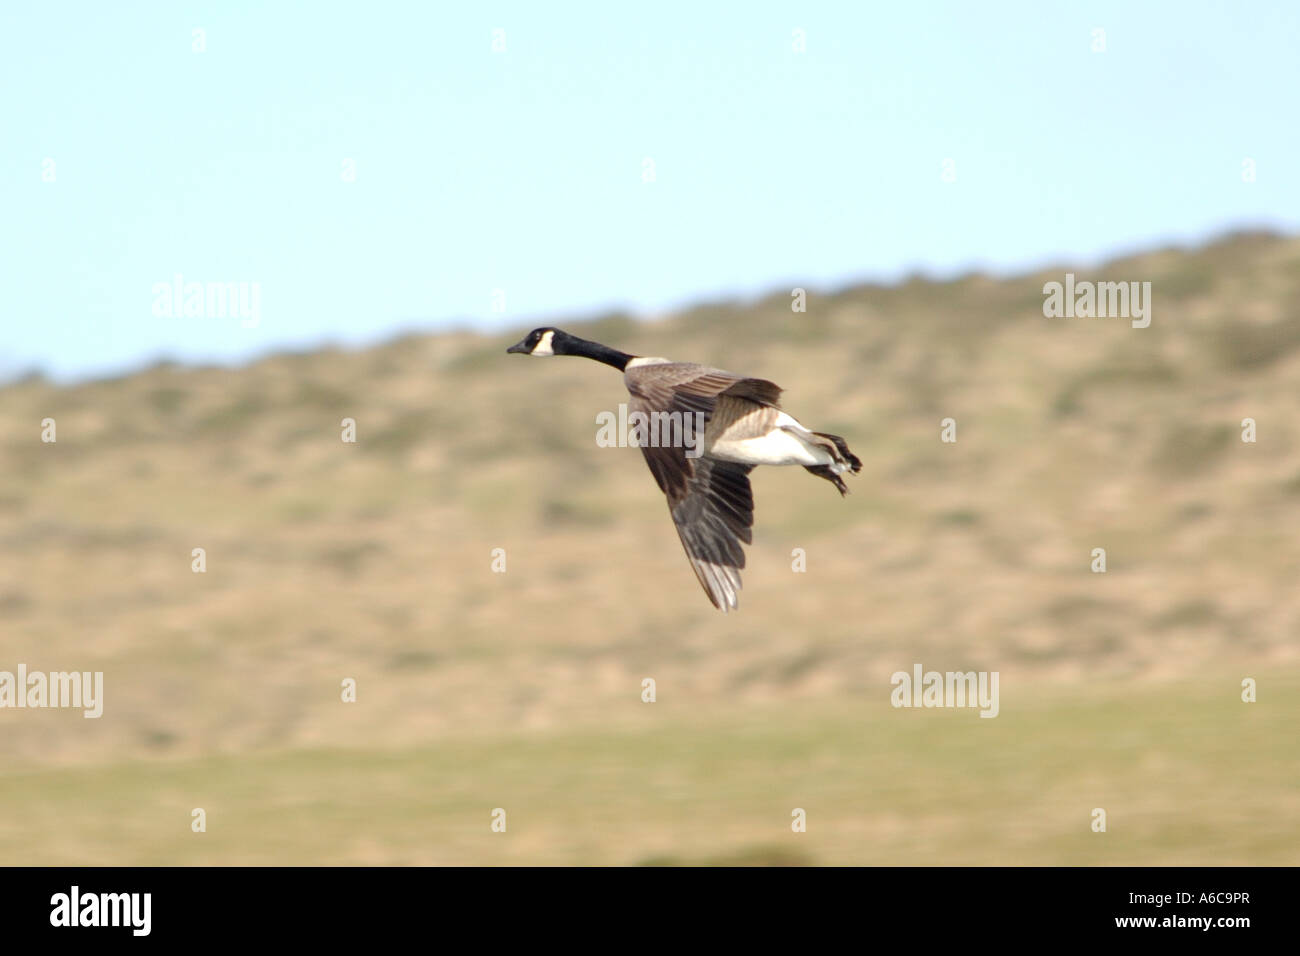 Canada Goose Branta canadensis in flight with wings outstretched catching the air and slowing down preparing to land Stock Photo